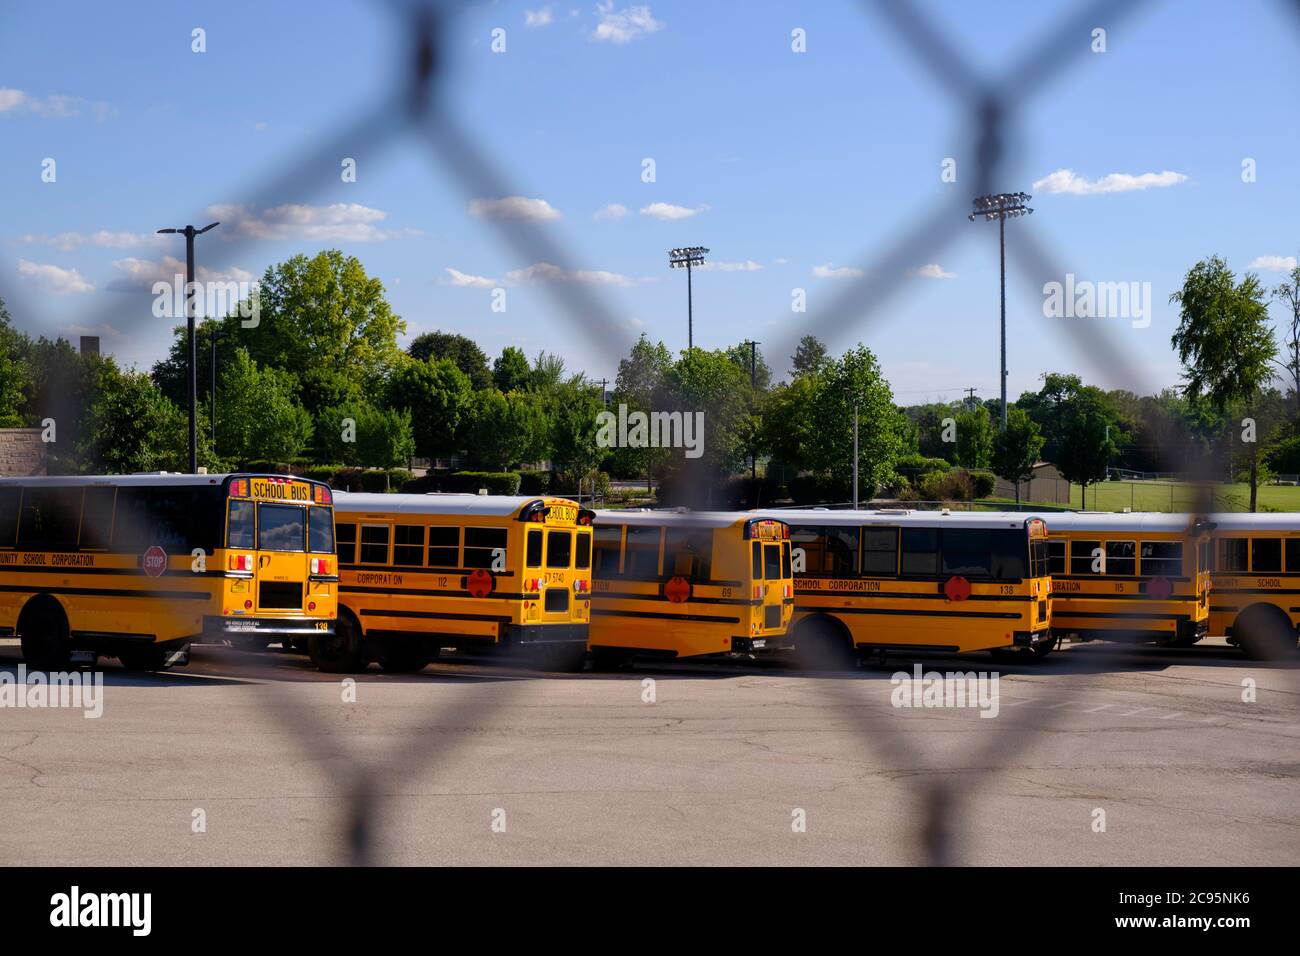 https://c8.alamy.com/comp/2C95NK6/bloomington-united-states-28th-july-2020-school-buses-fill-an-mccsc-parking-area-for-buses-during-the-demonstrationindiana-is-experiencing-a-73-percent-increase-in-new-coronavirus-infections-but-local-schools-were-due-to-resume-in-person-classes-next-week-on-august-5th-however-while-some-want-their-kids-back-in-school-others-fear-schools-will-be-a-daily-super-spreader-event-and-asked-the-local-school-board-to-delay-classes-until-more-data-is-available-on-the-spread-of-the-virus-in-the-community-credit-sopa-images-limitedalamy-live-news-2C95NK6.jpg